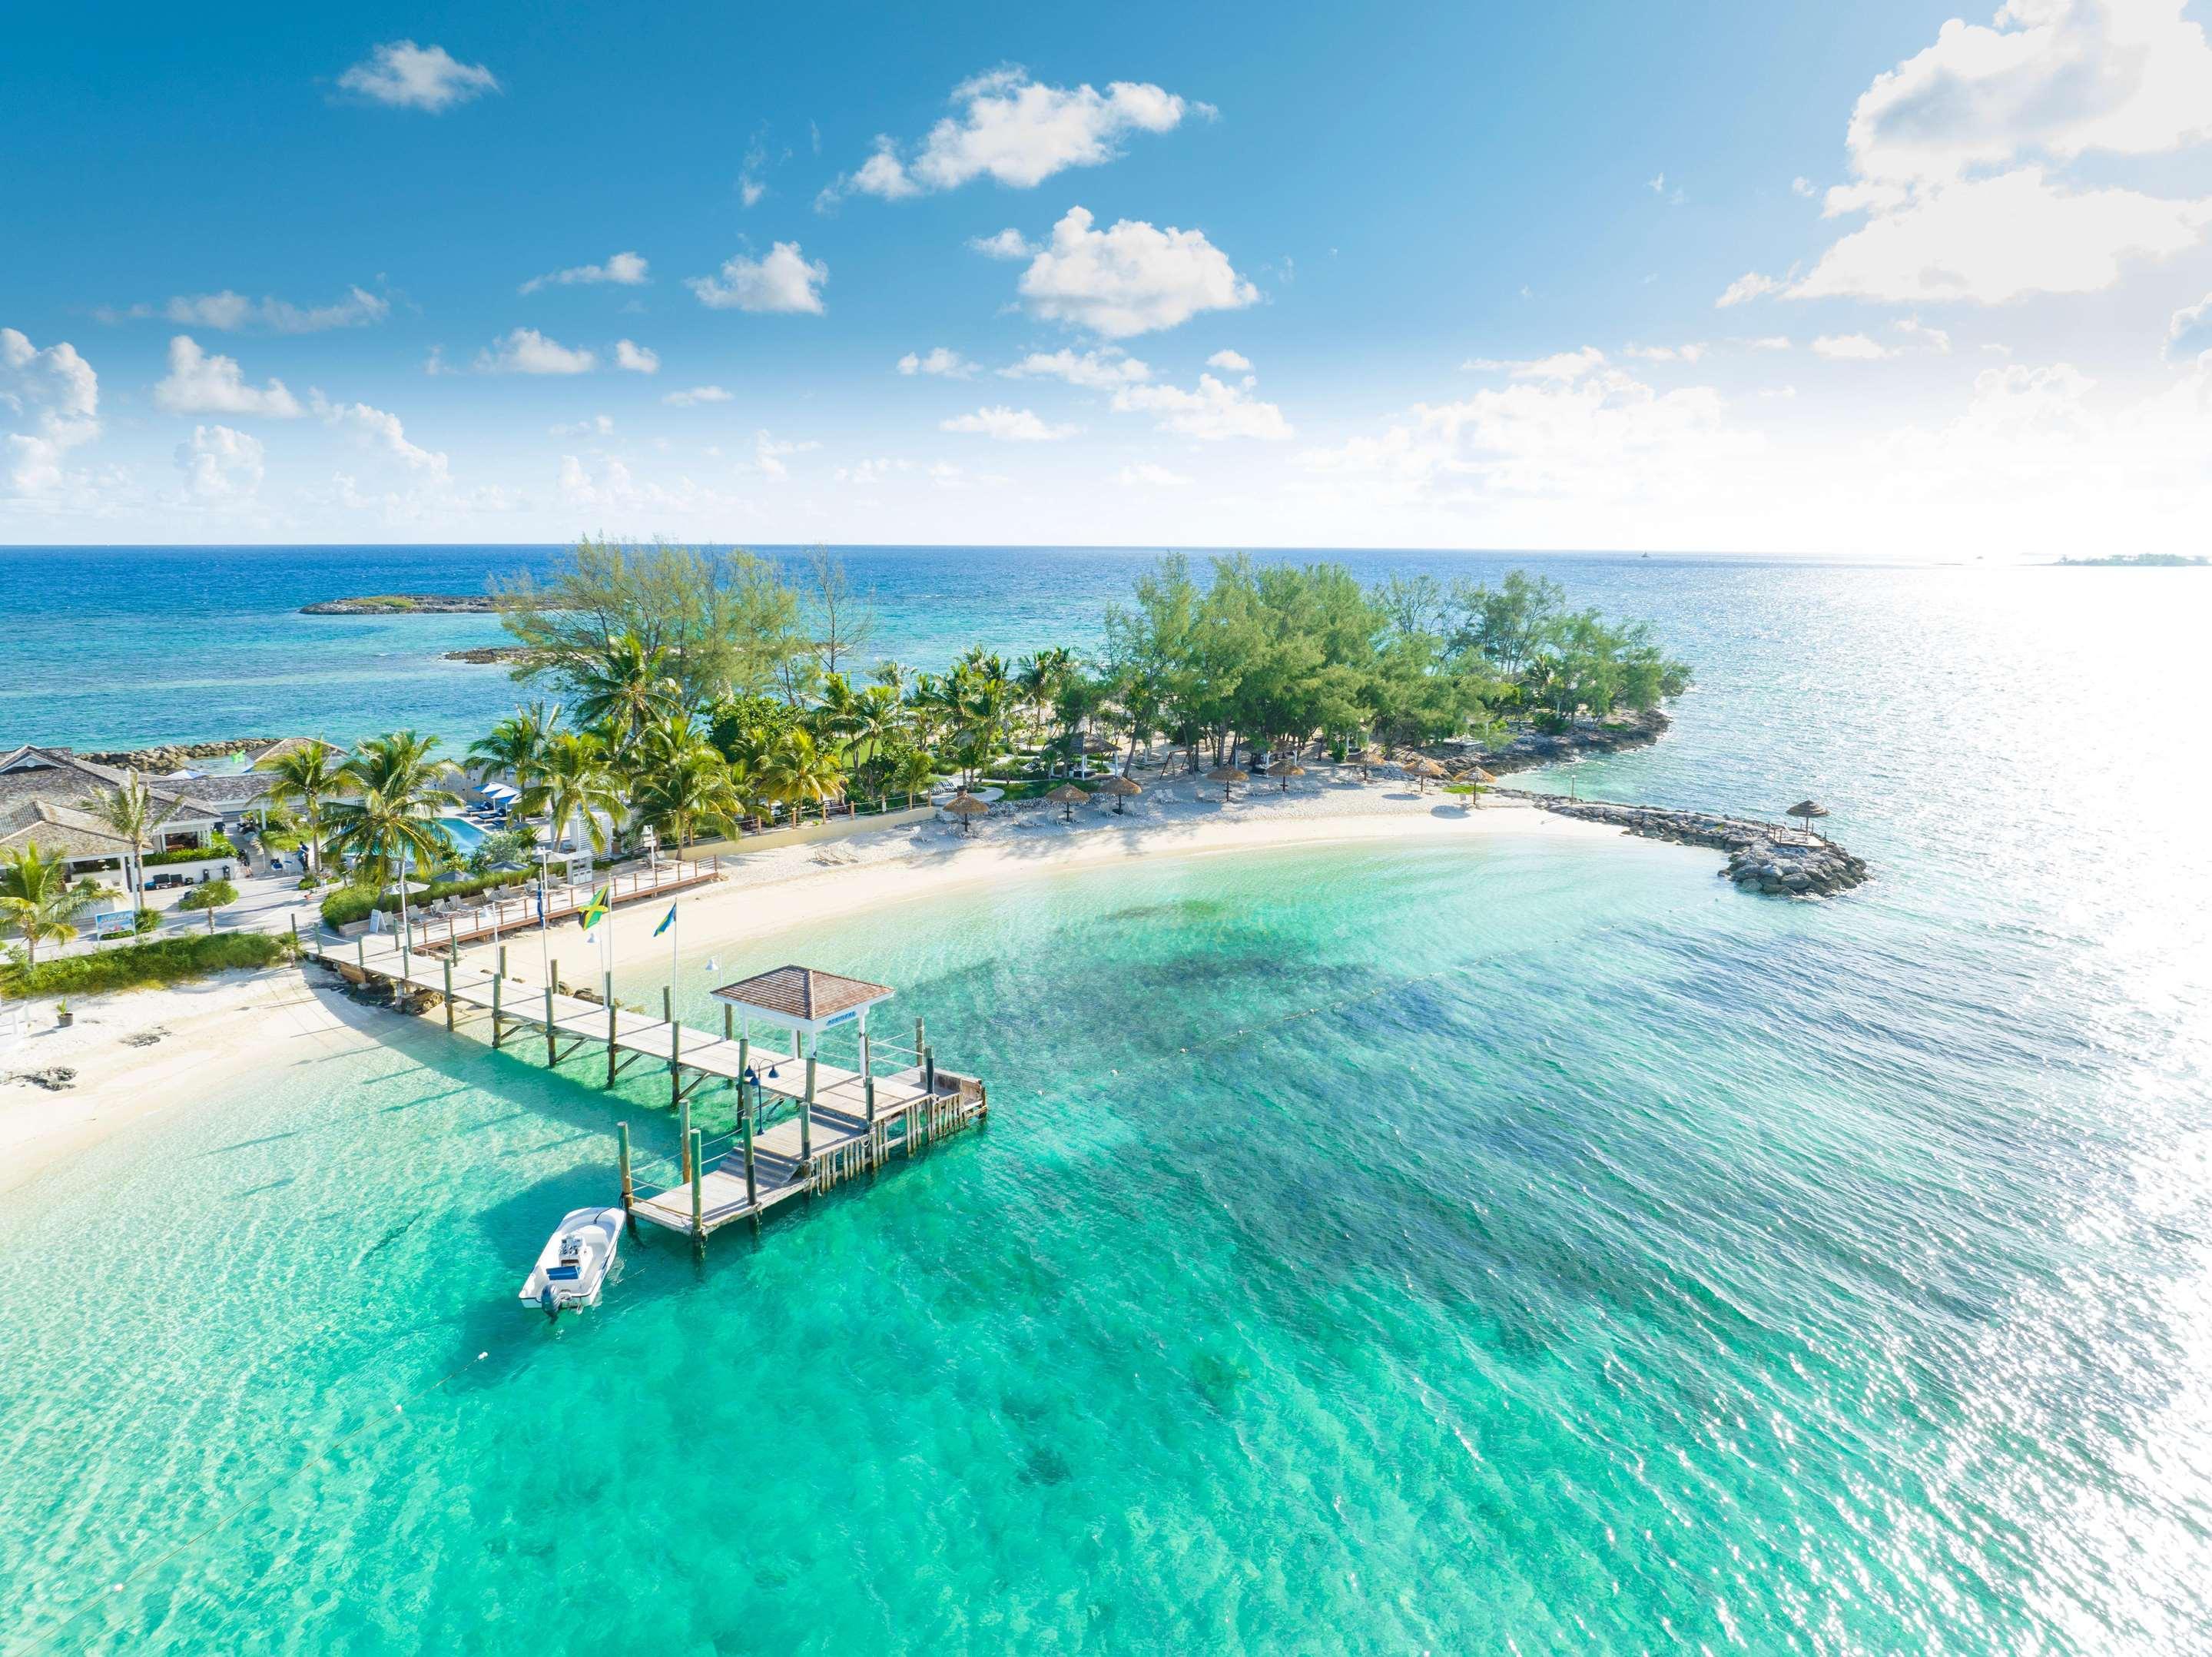 Sandals to Reopen Resorts in The Bahamas, Barbados and Grenada